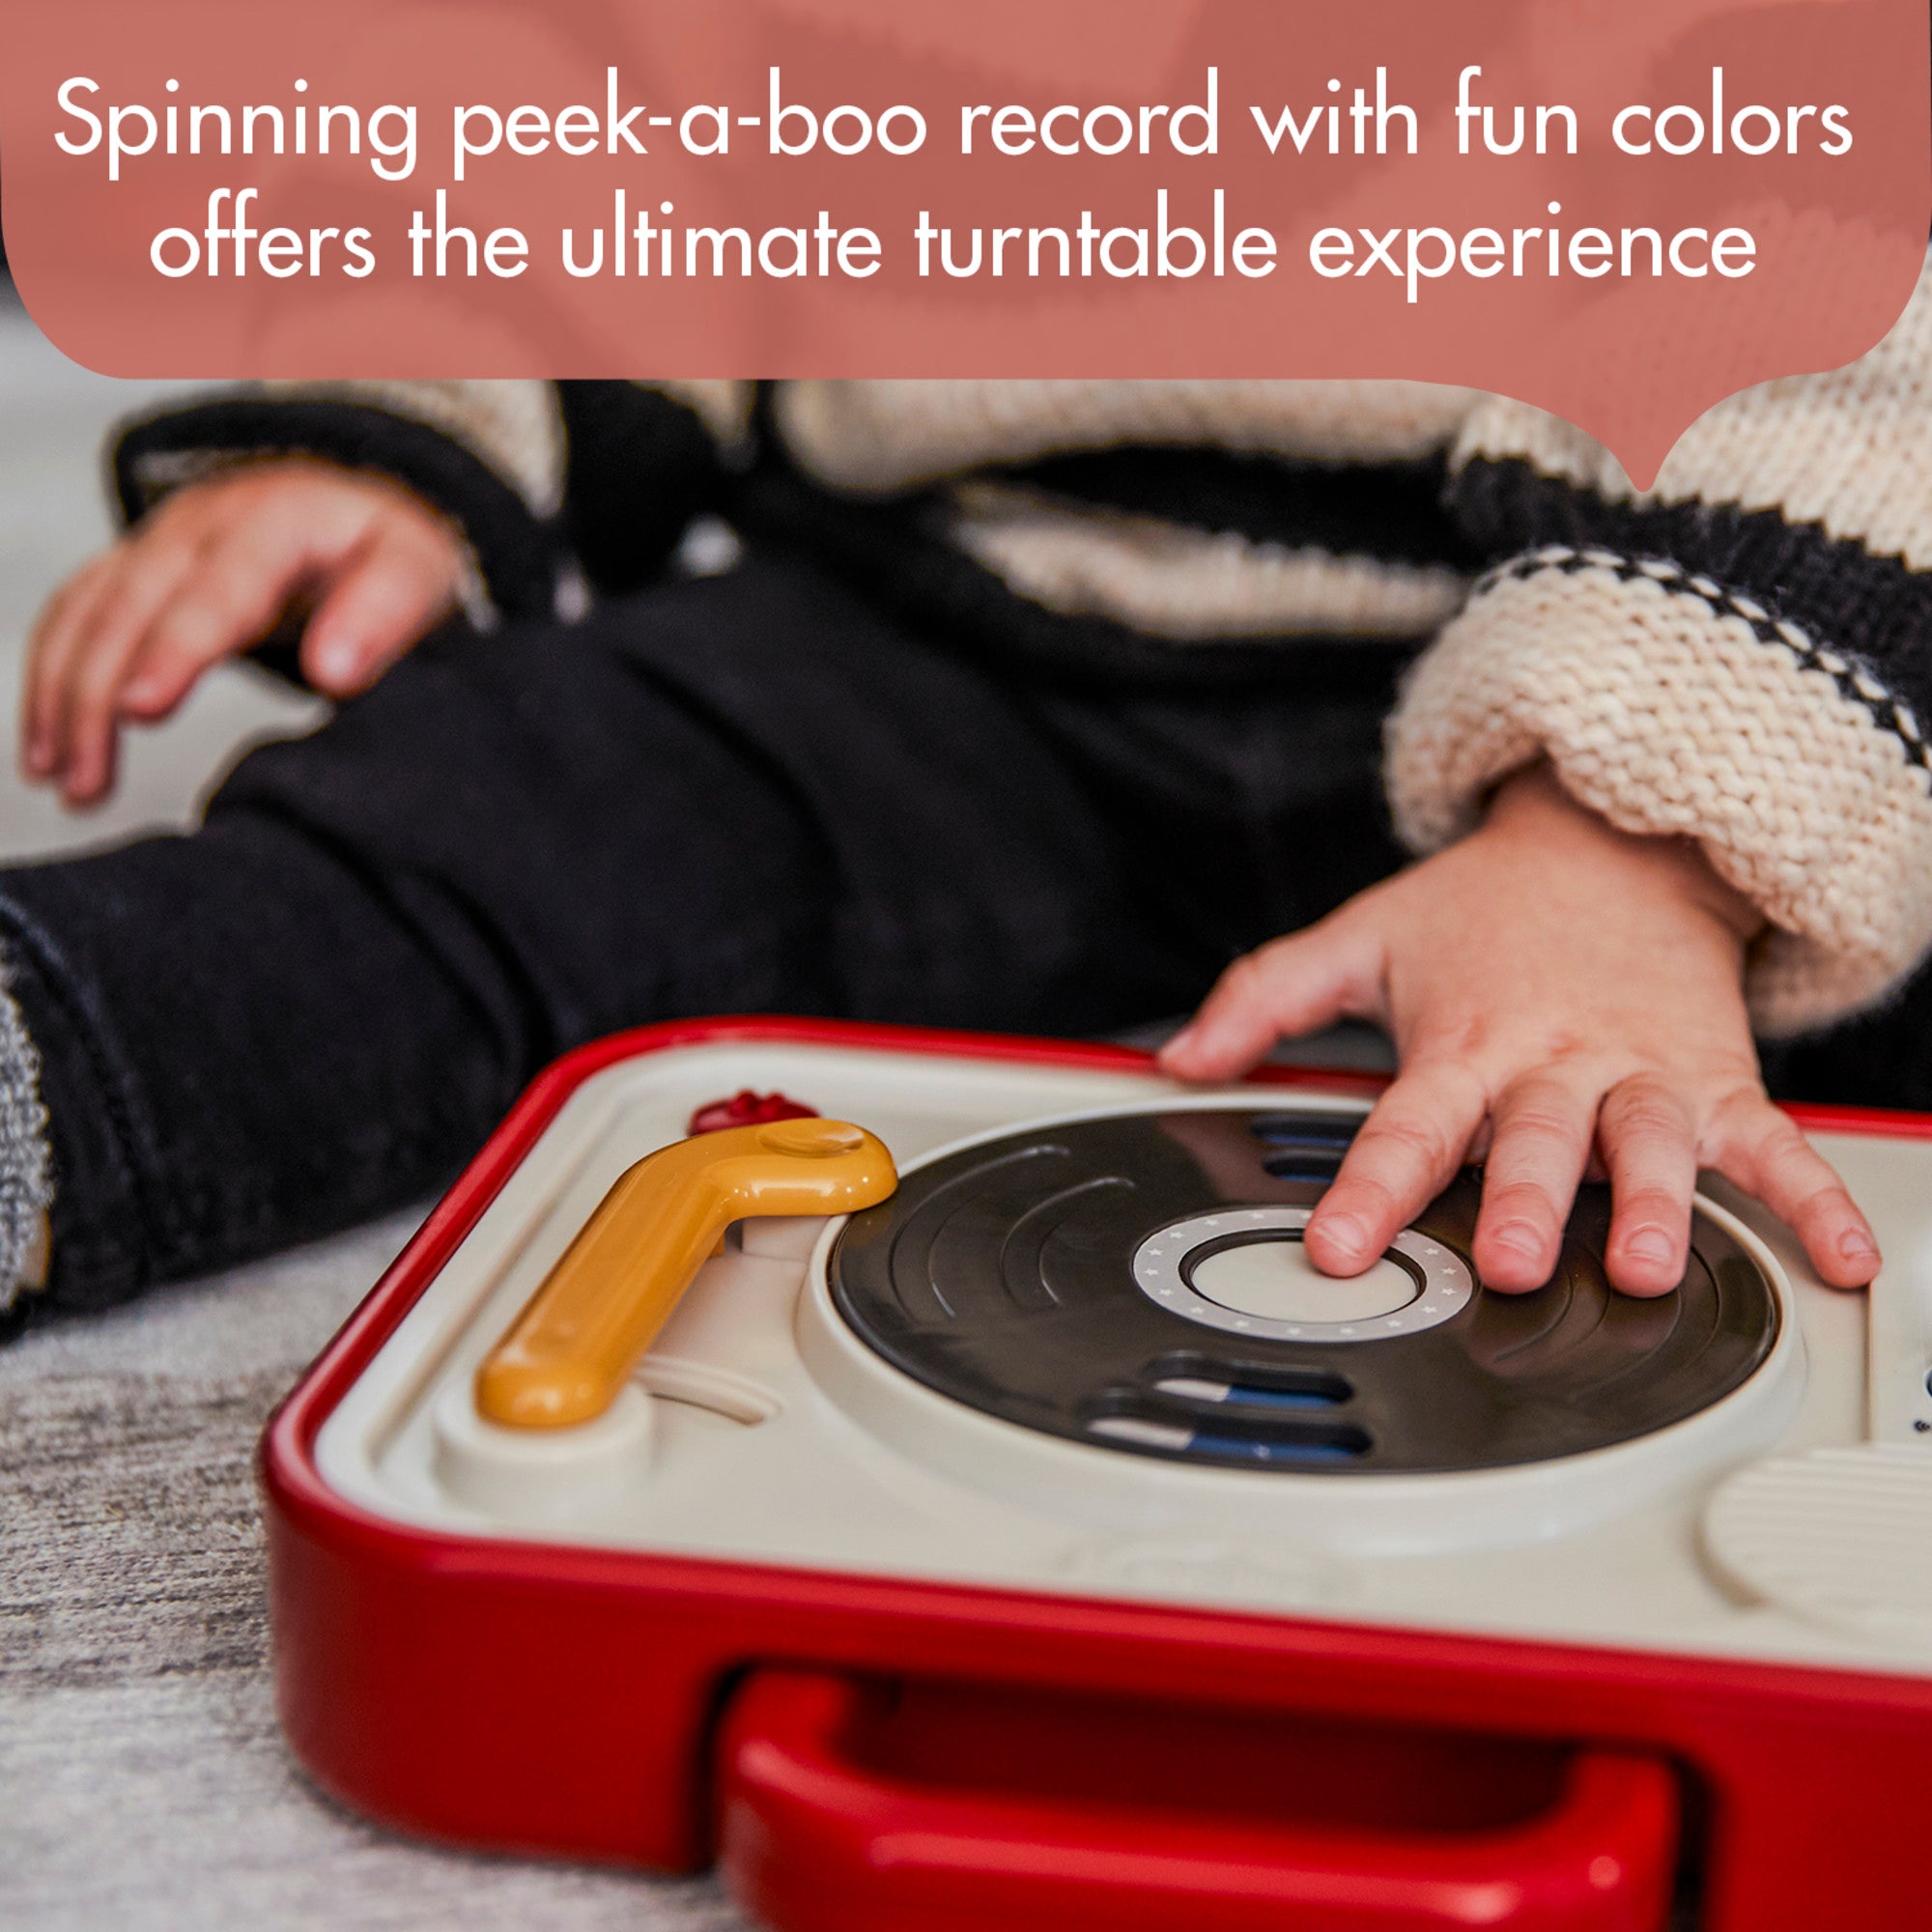 Tiny Rockers DJ Station - Spinning peek-a-boo record with fun colors offers the ultimate turntable experience